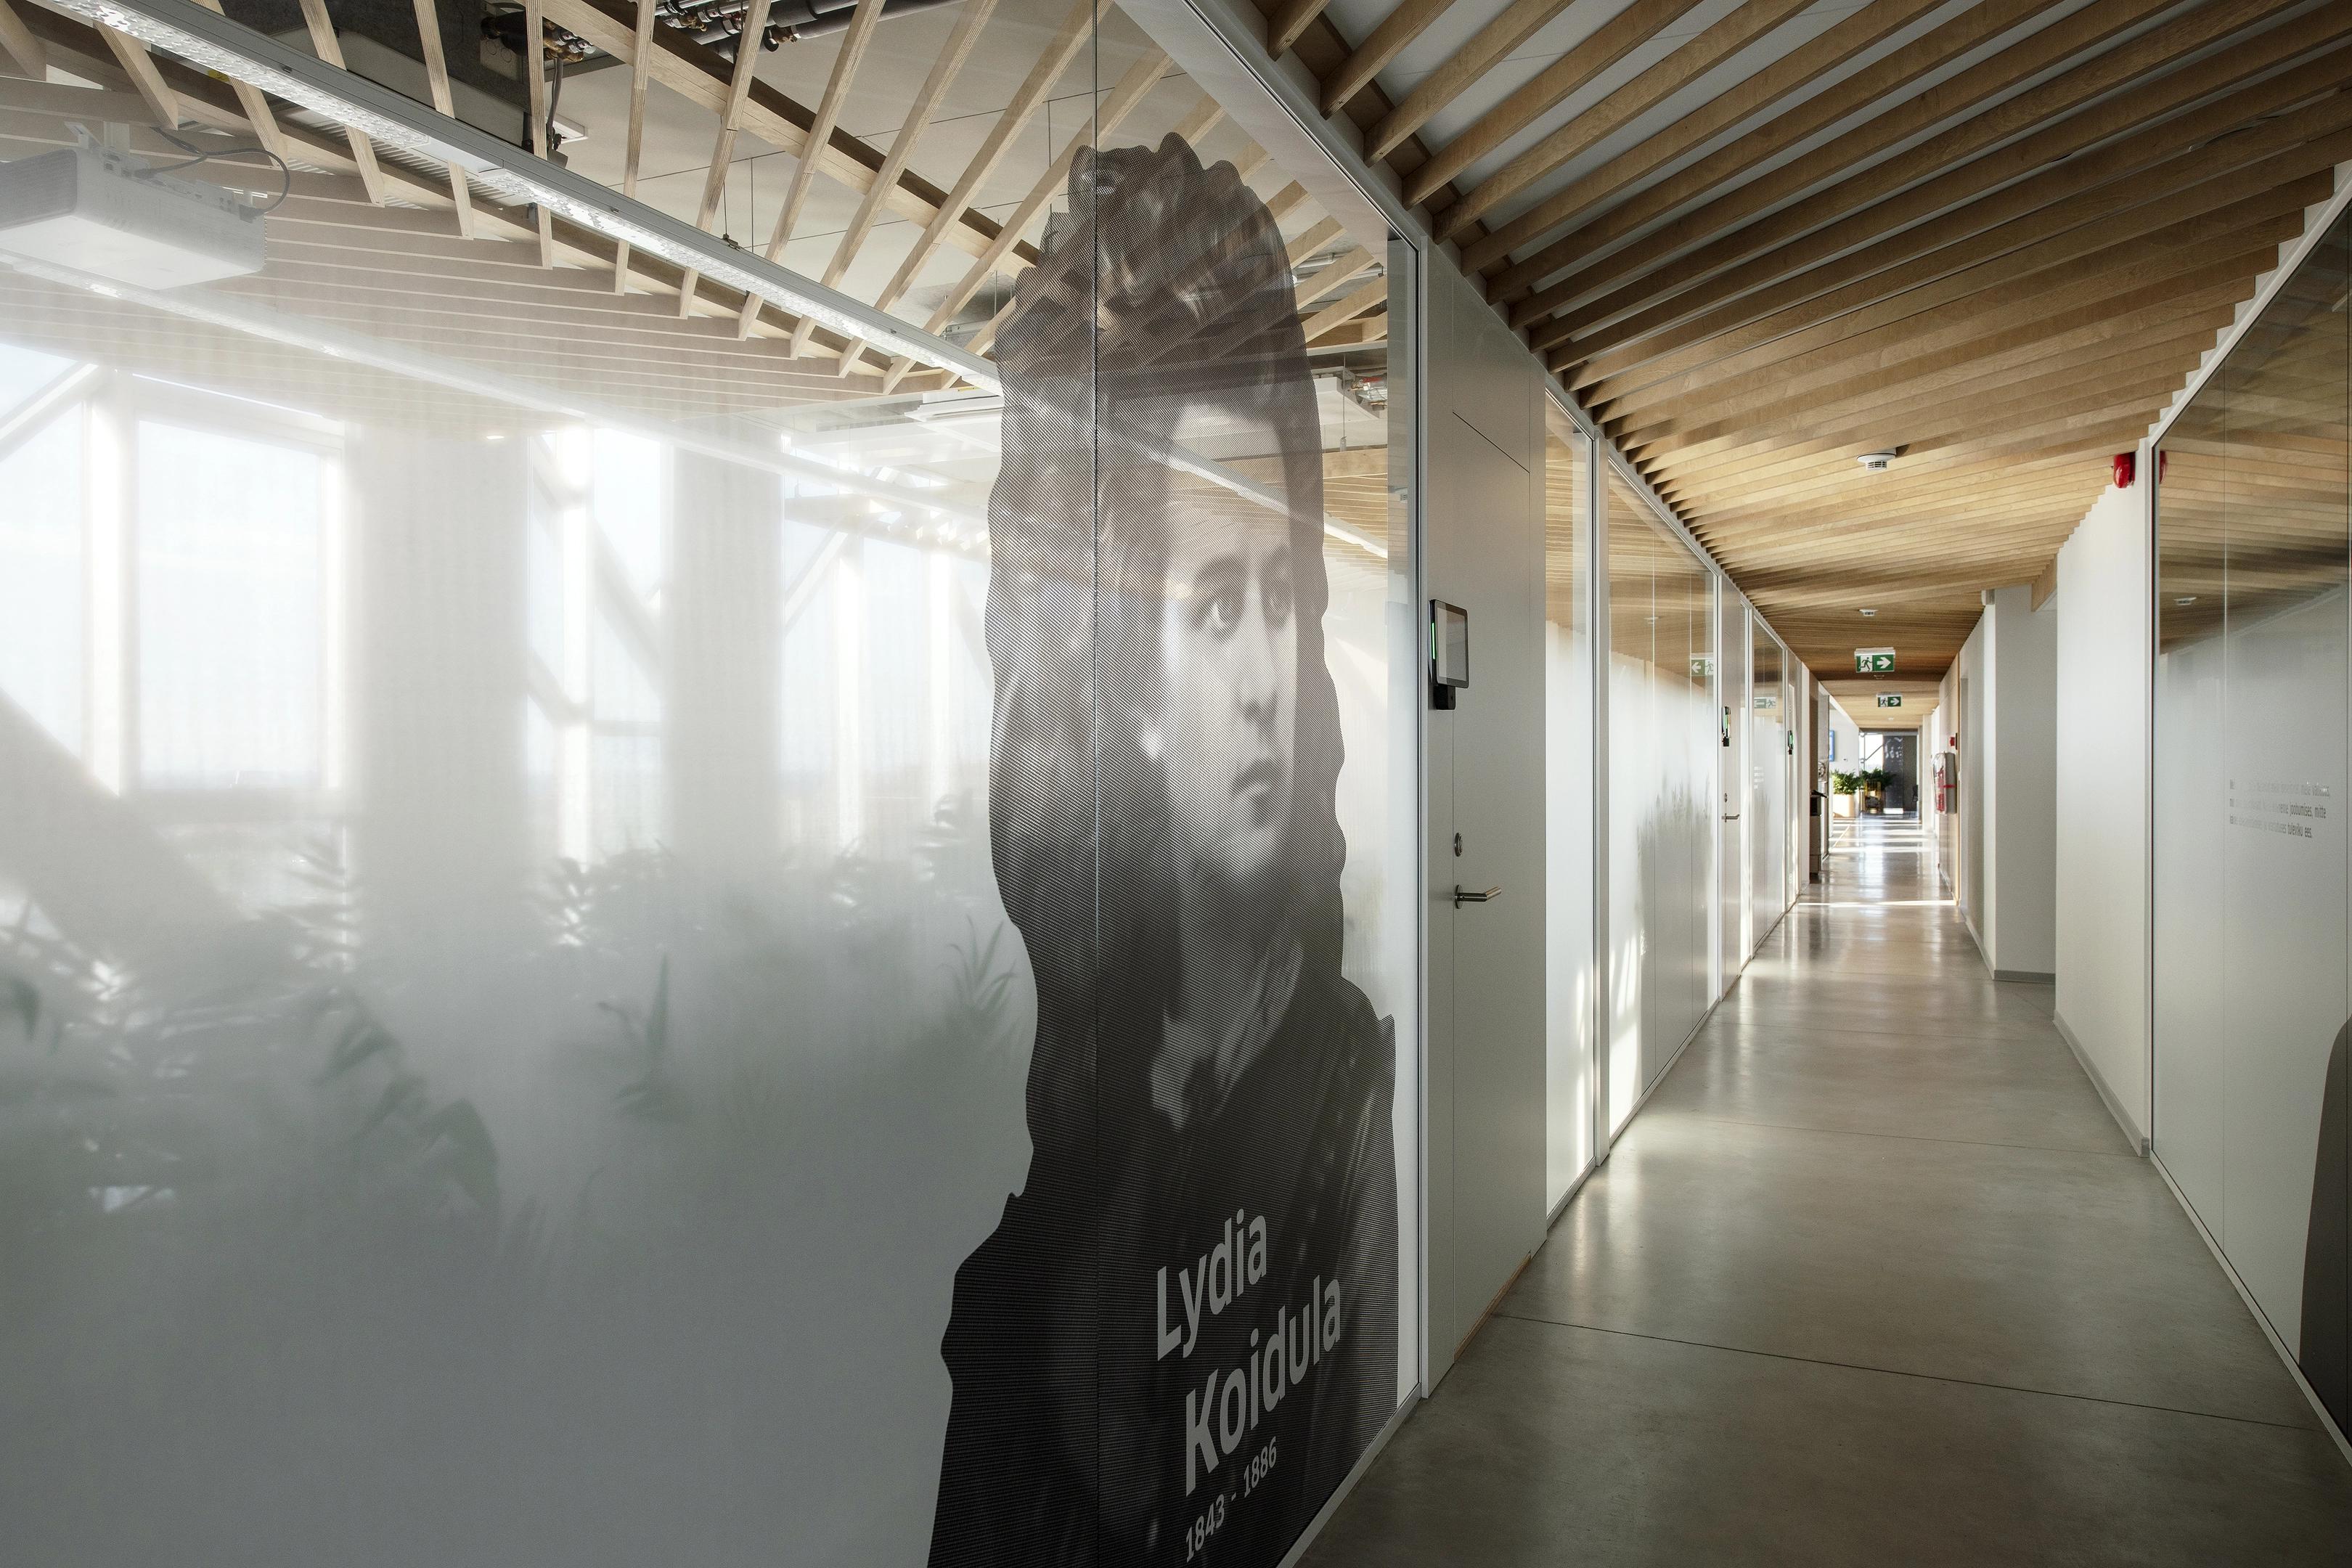 Portrait of Lydia Koidula inside of the headquarters of Postimees